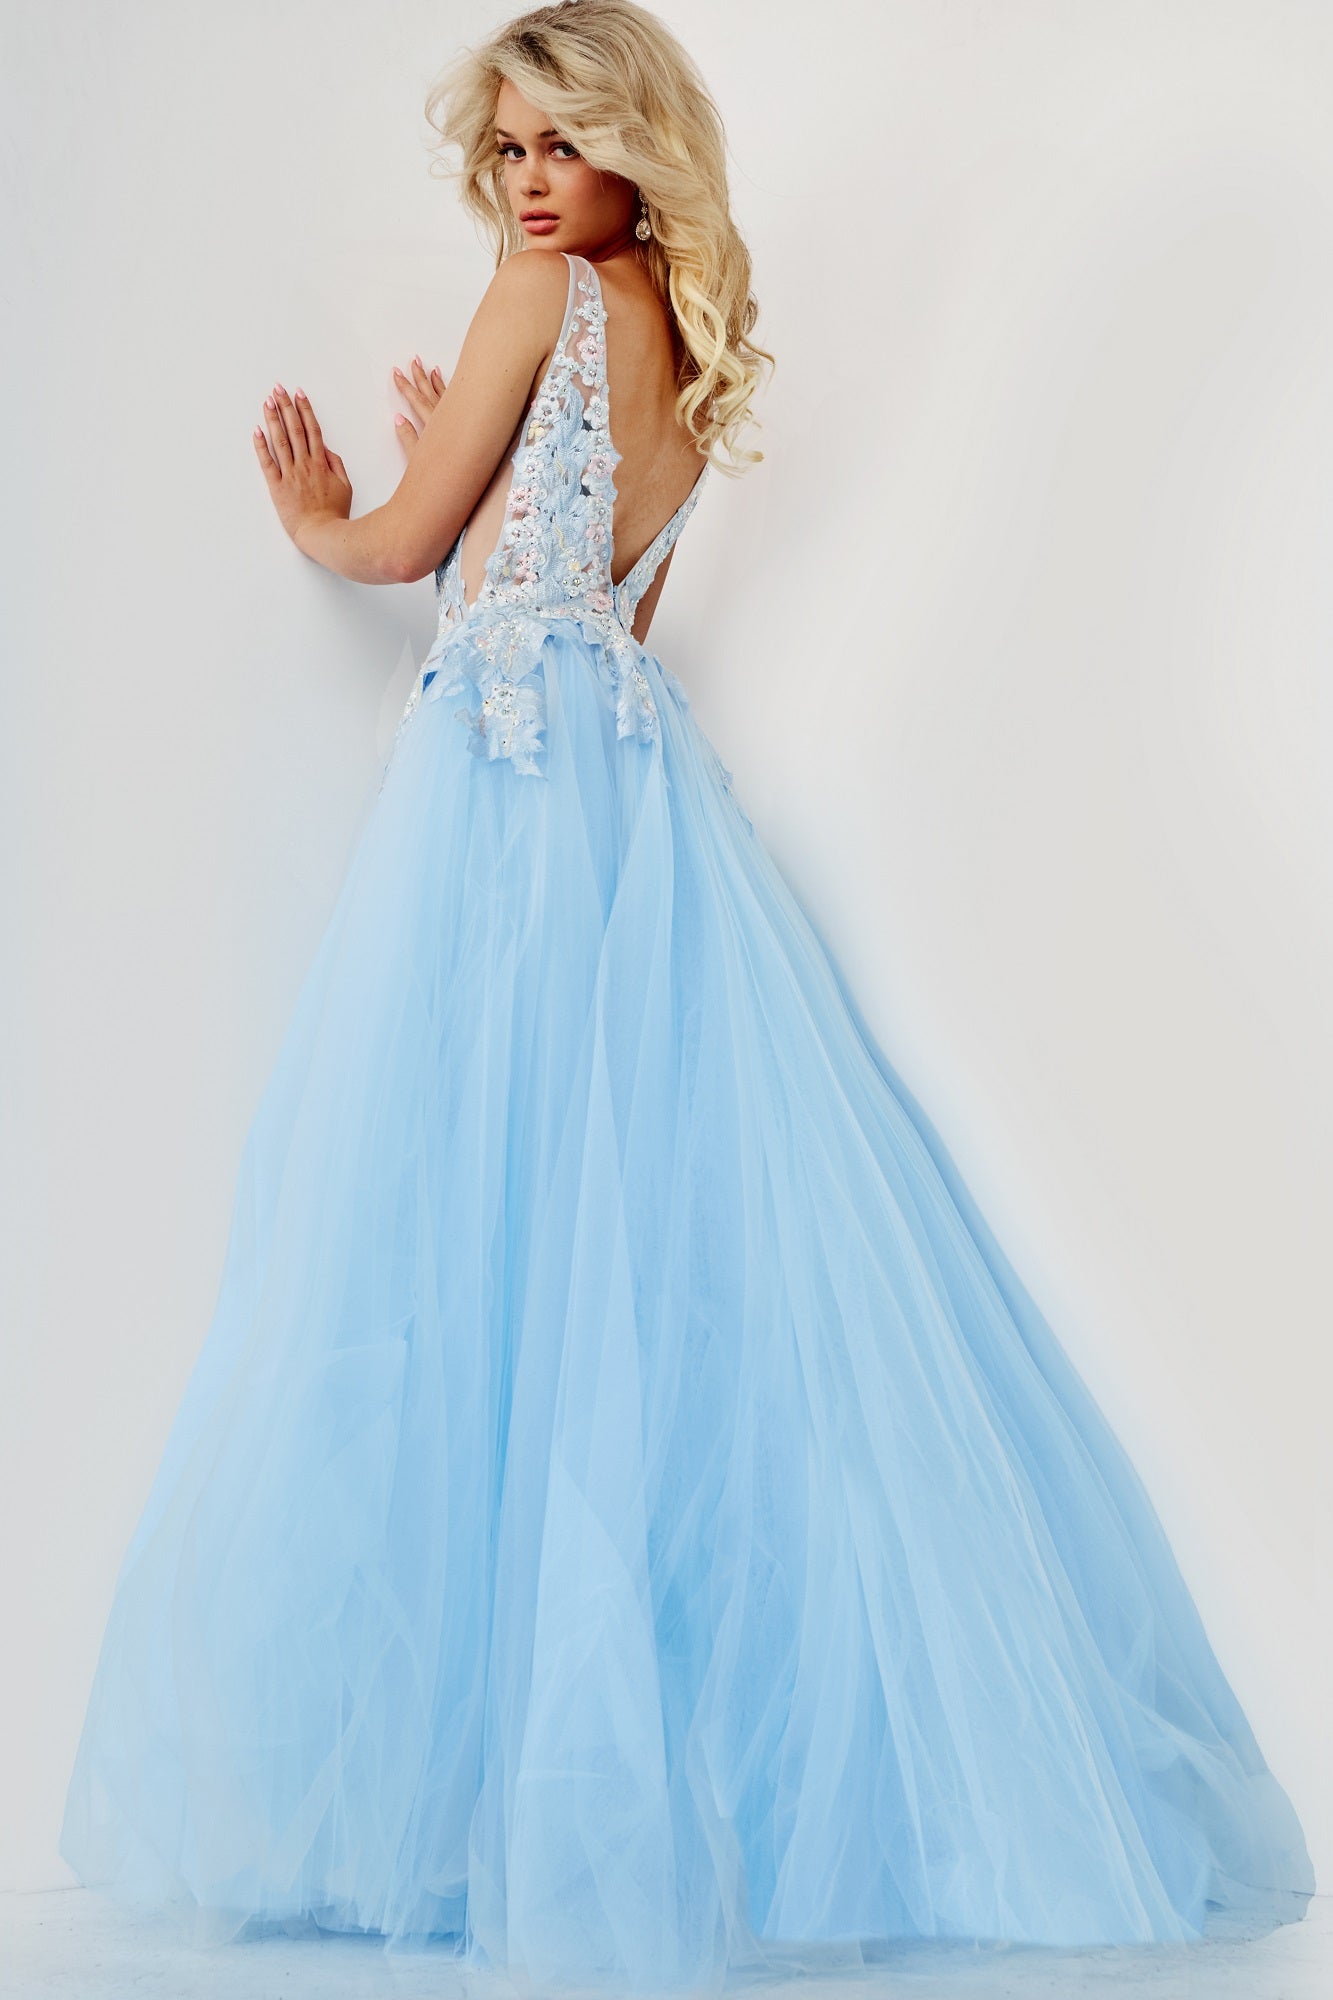 Jovani Prom Dress 06808 Light Blue Floral Lace Long Ball gown